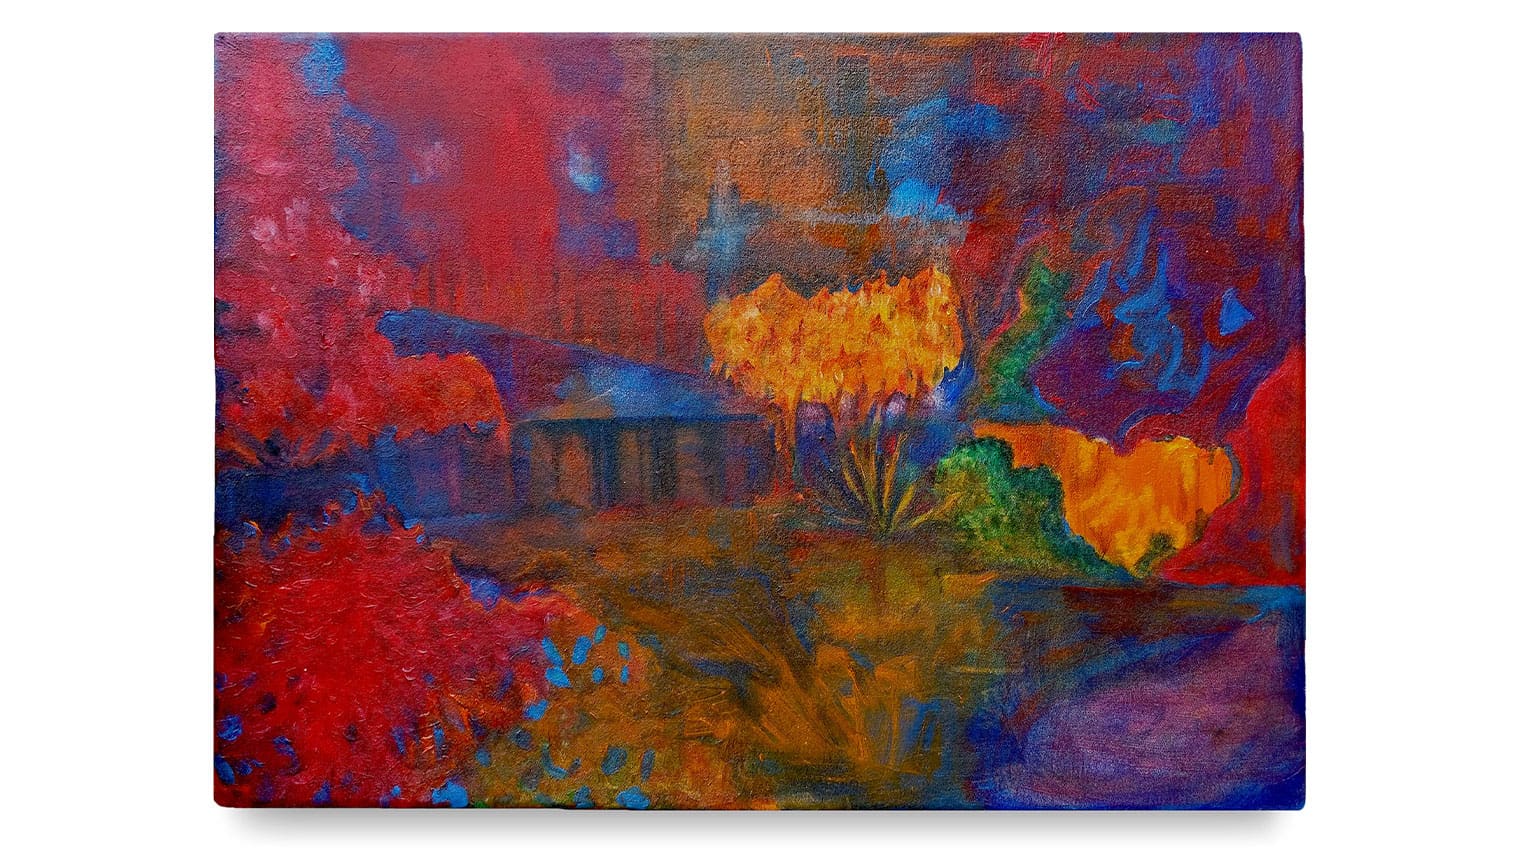 Painting titled 'Sumac in Autumn' by artist Aiste Jakonyte